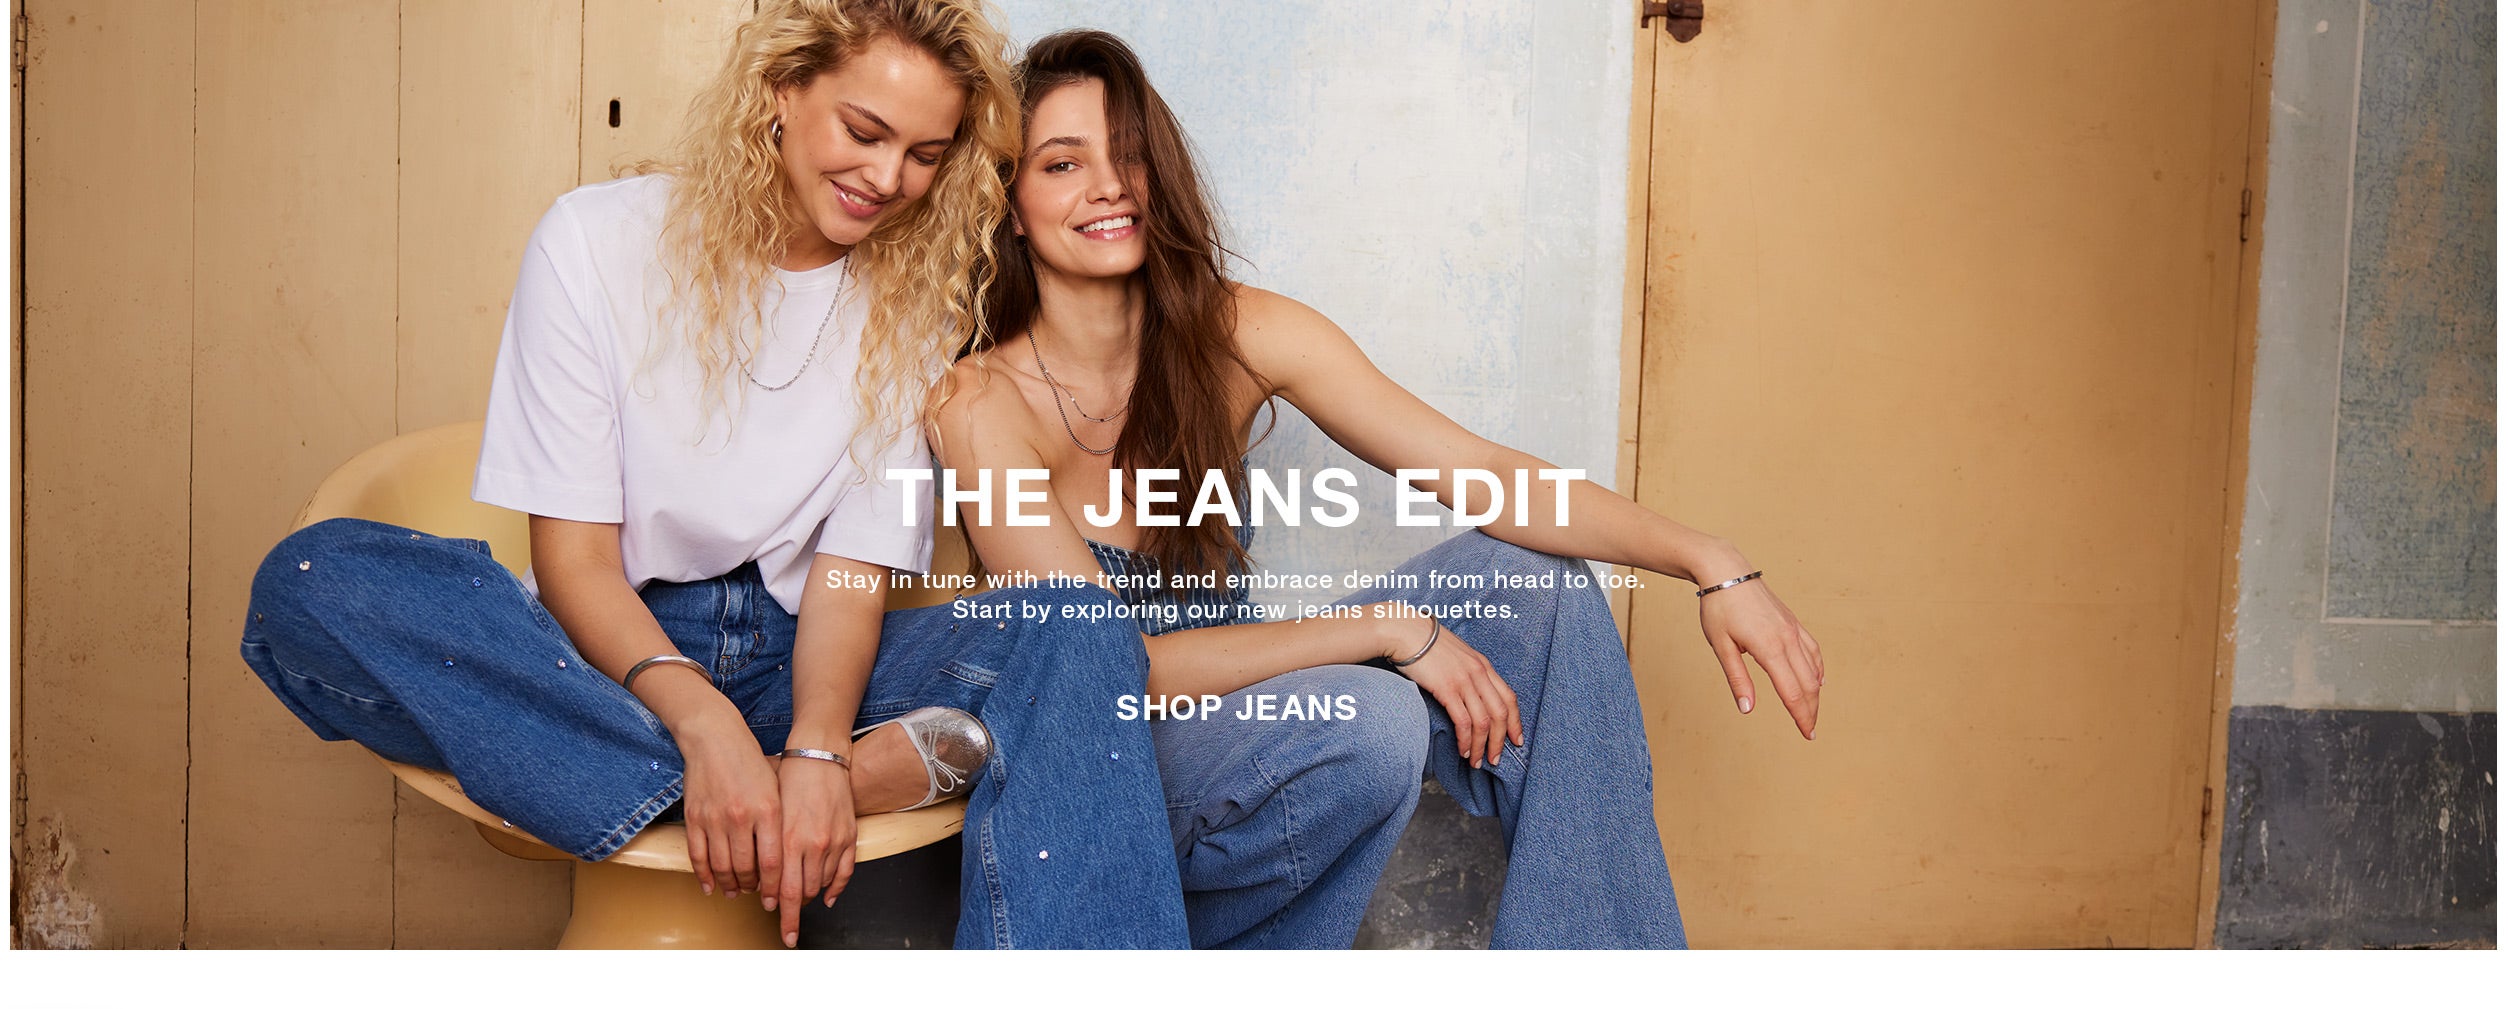 The Best Brands of Jeans You Have to Buy - Society19 | Fashion, Clothes,  Fashion outfits